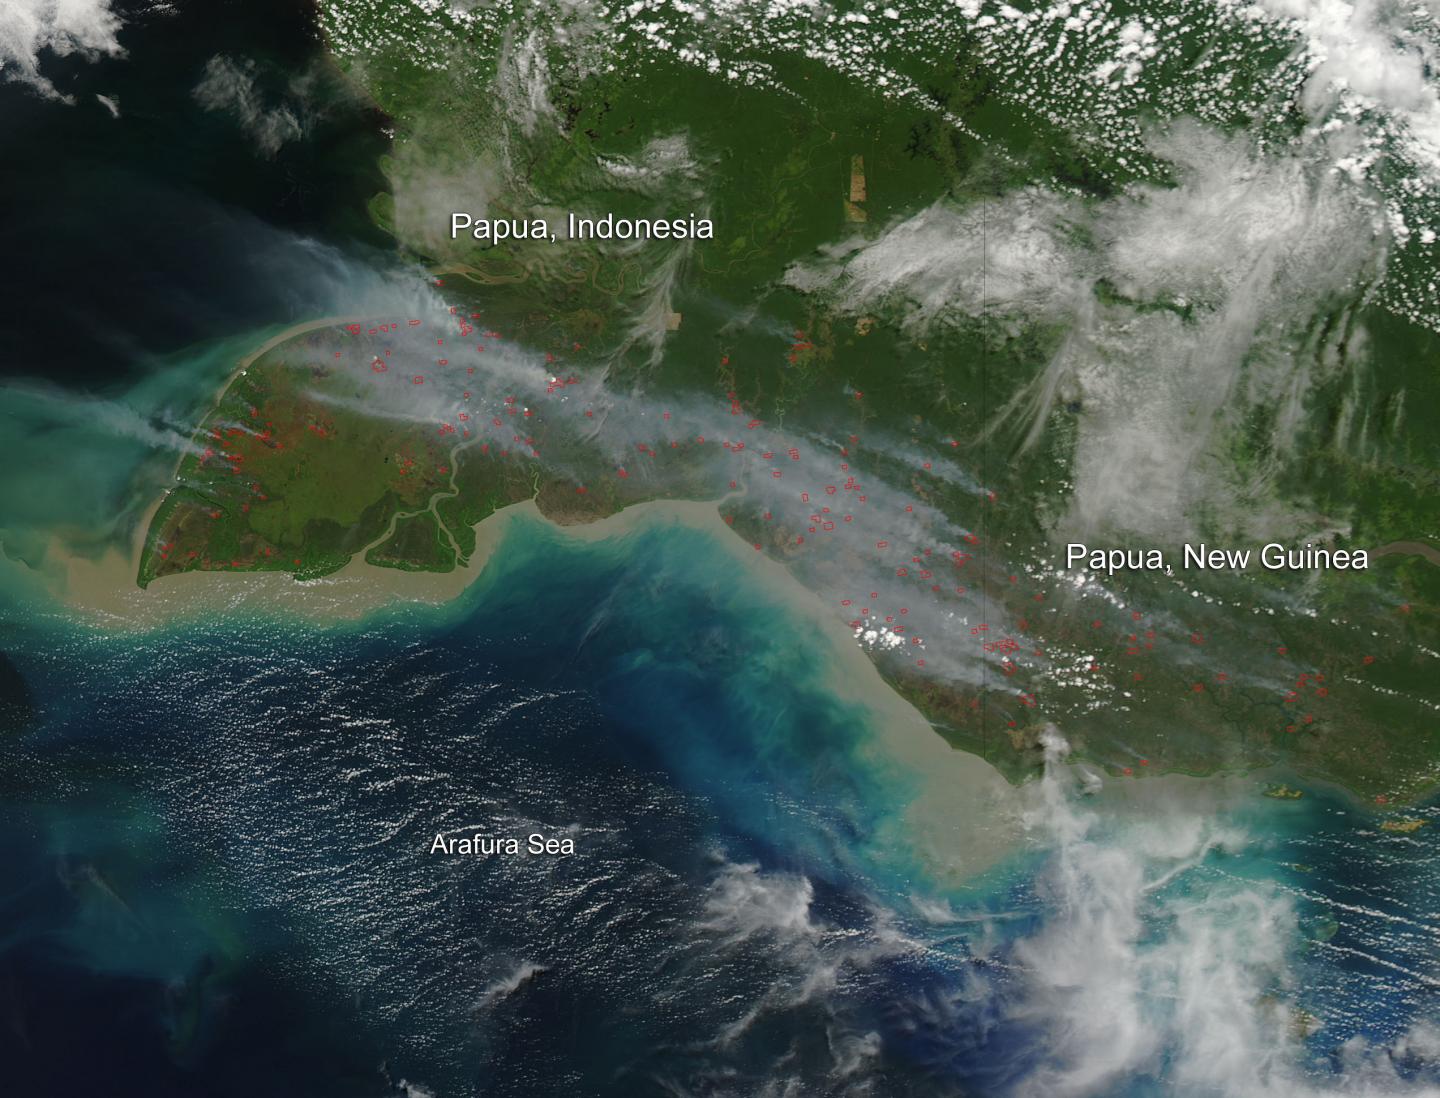 Fires in Papua, Indonesia and New Guinea